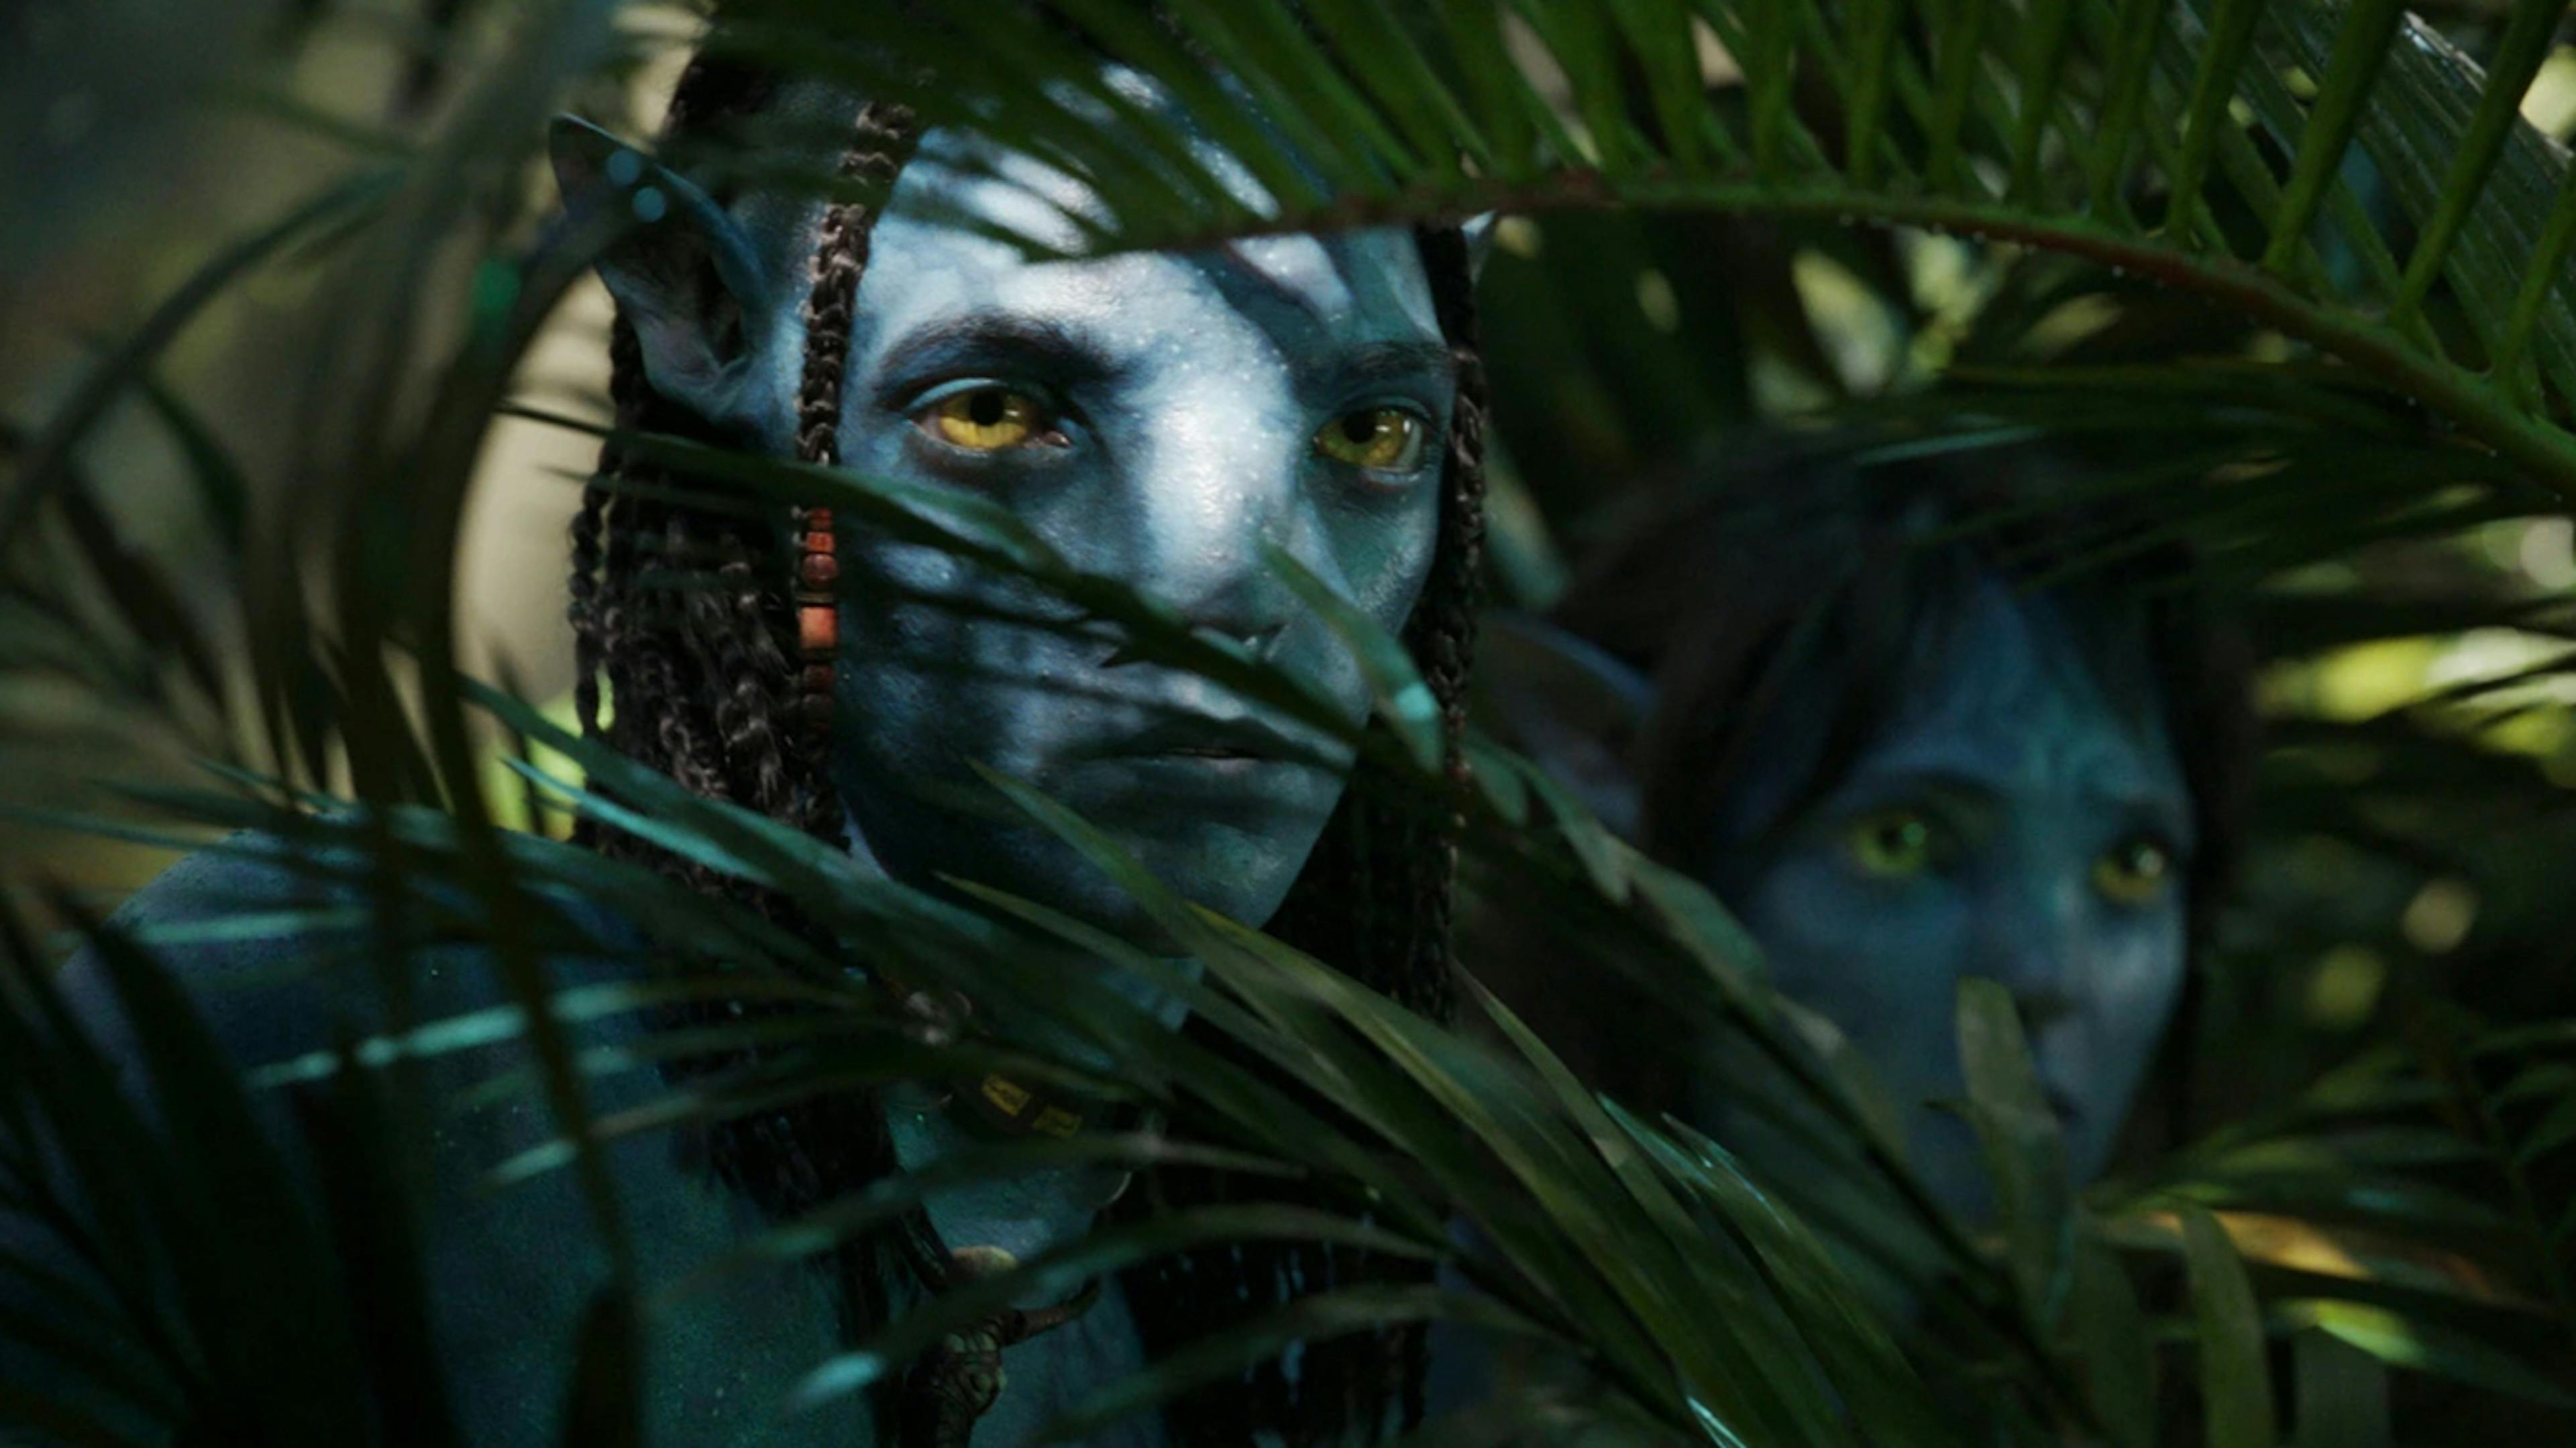 Still from the movie Avatar: The Way of Water